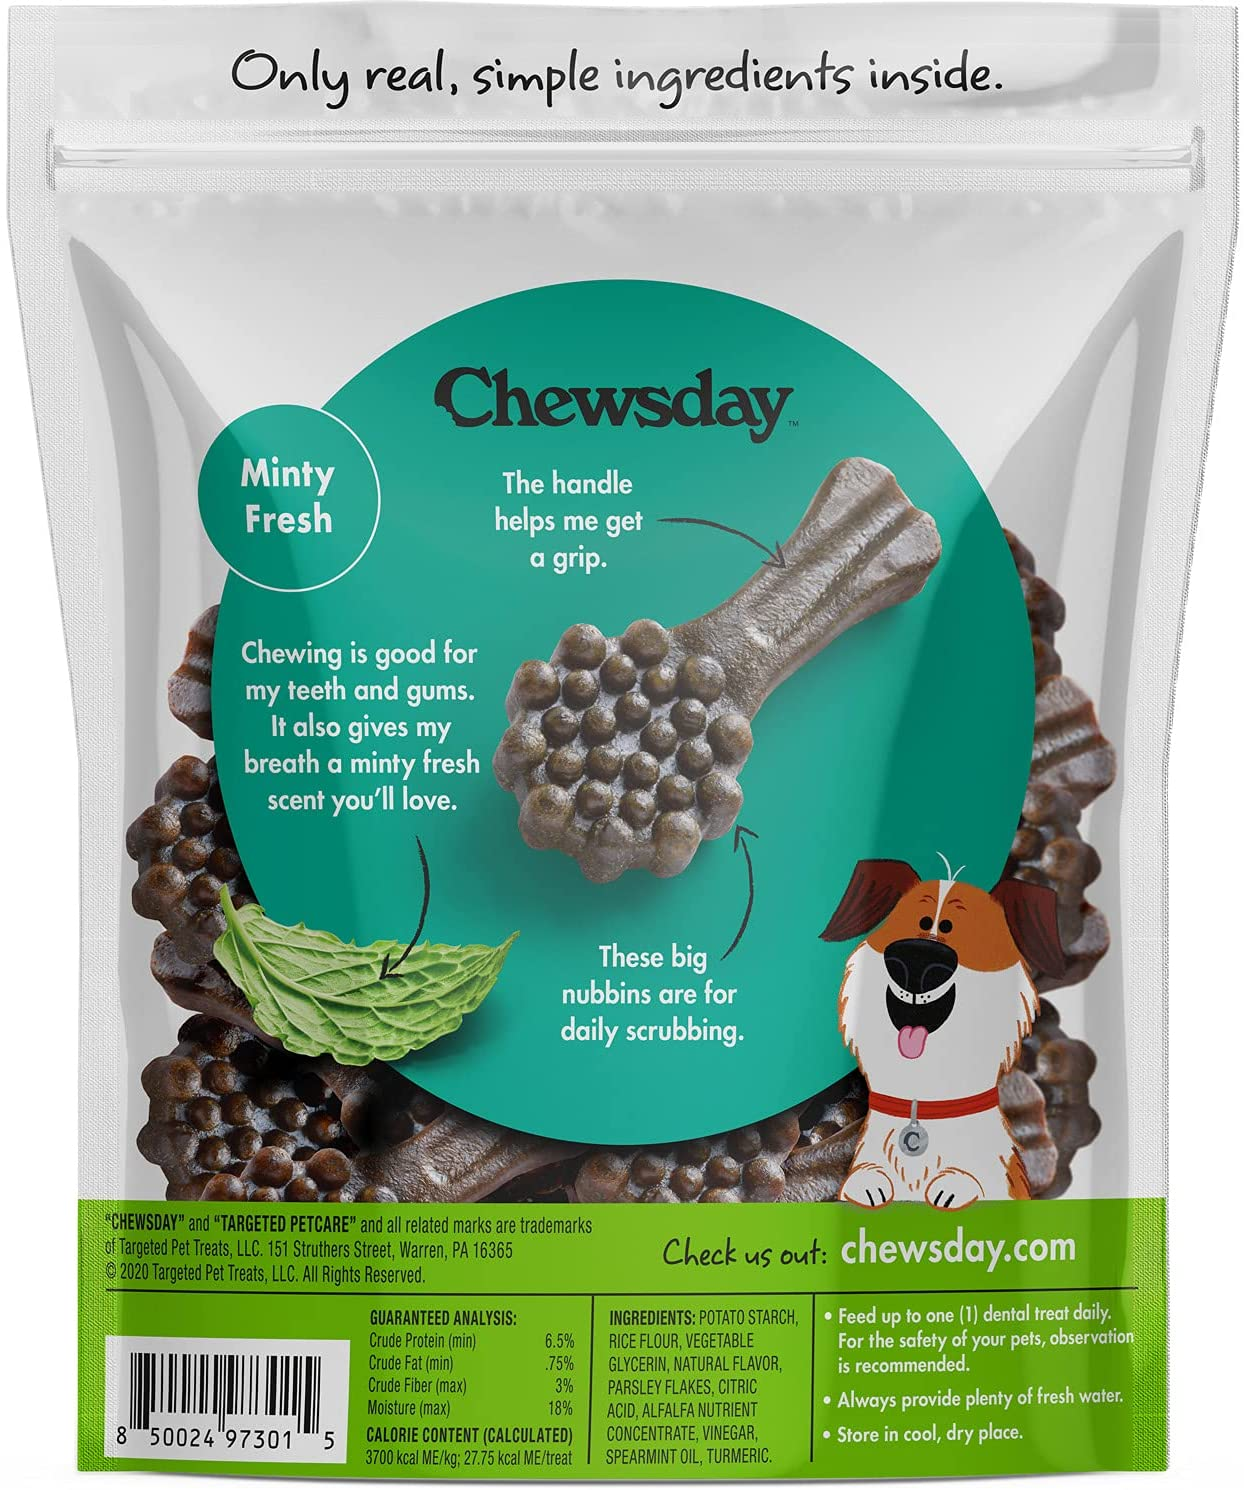 Chewsday Extra Small Minty Fresh Daily Dental Dog Chews, Made in the USA, Natural Highly-Digestible Oral Health Treats for Healthy Gums and Teeth - 28 Count